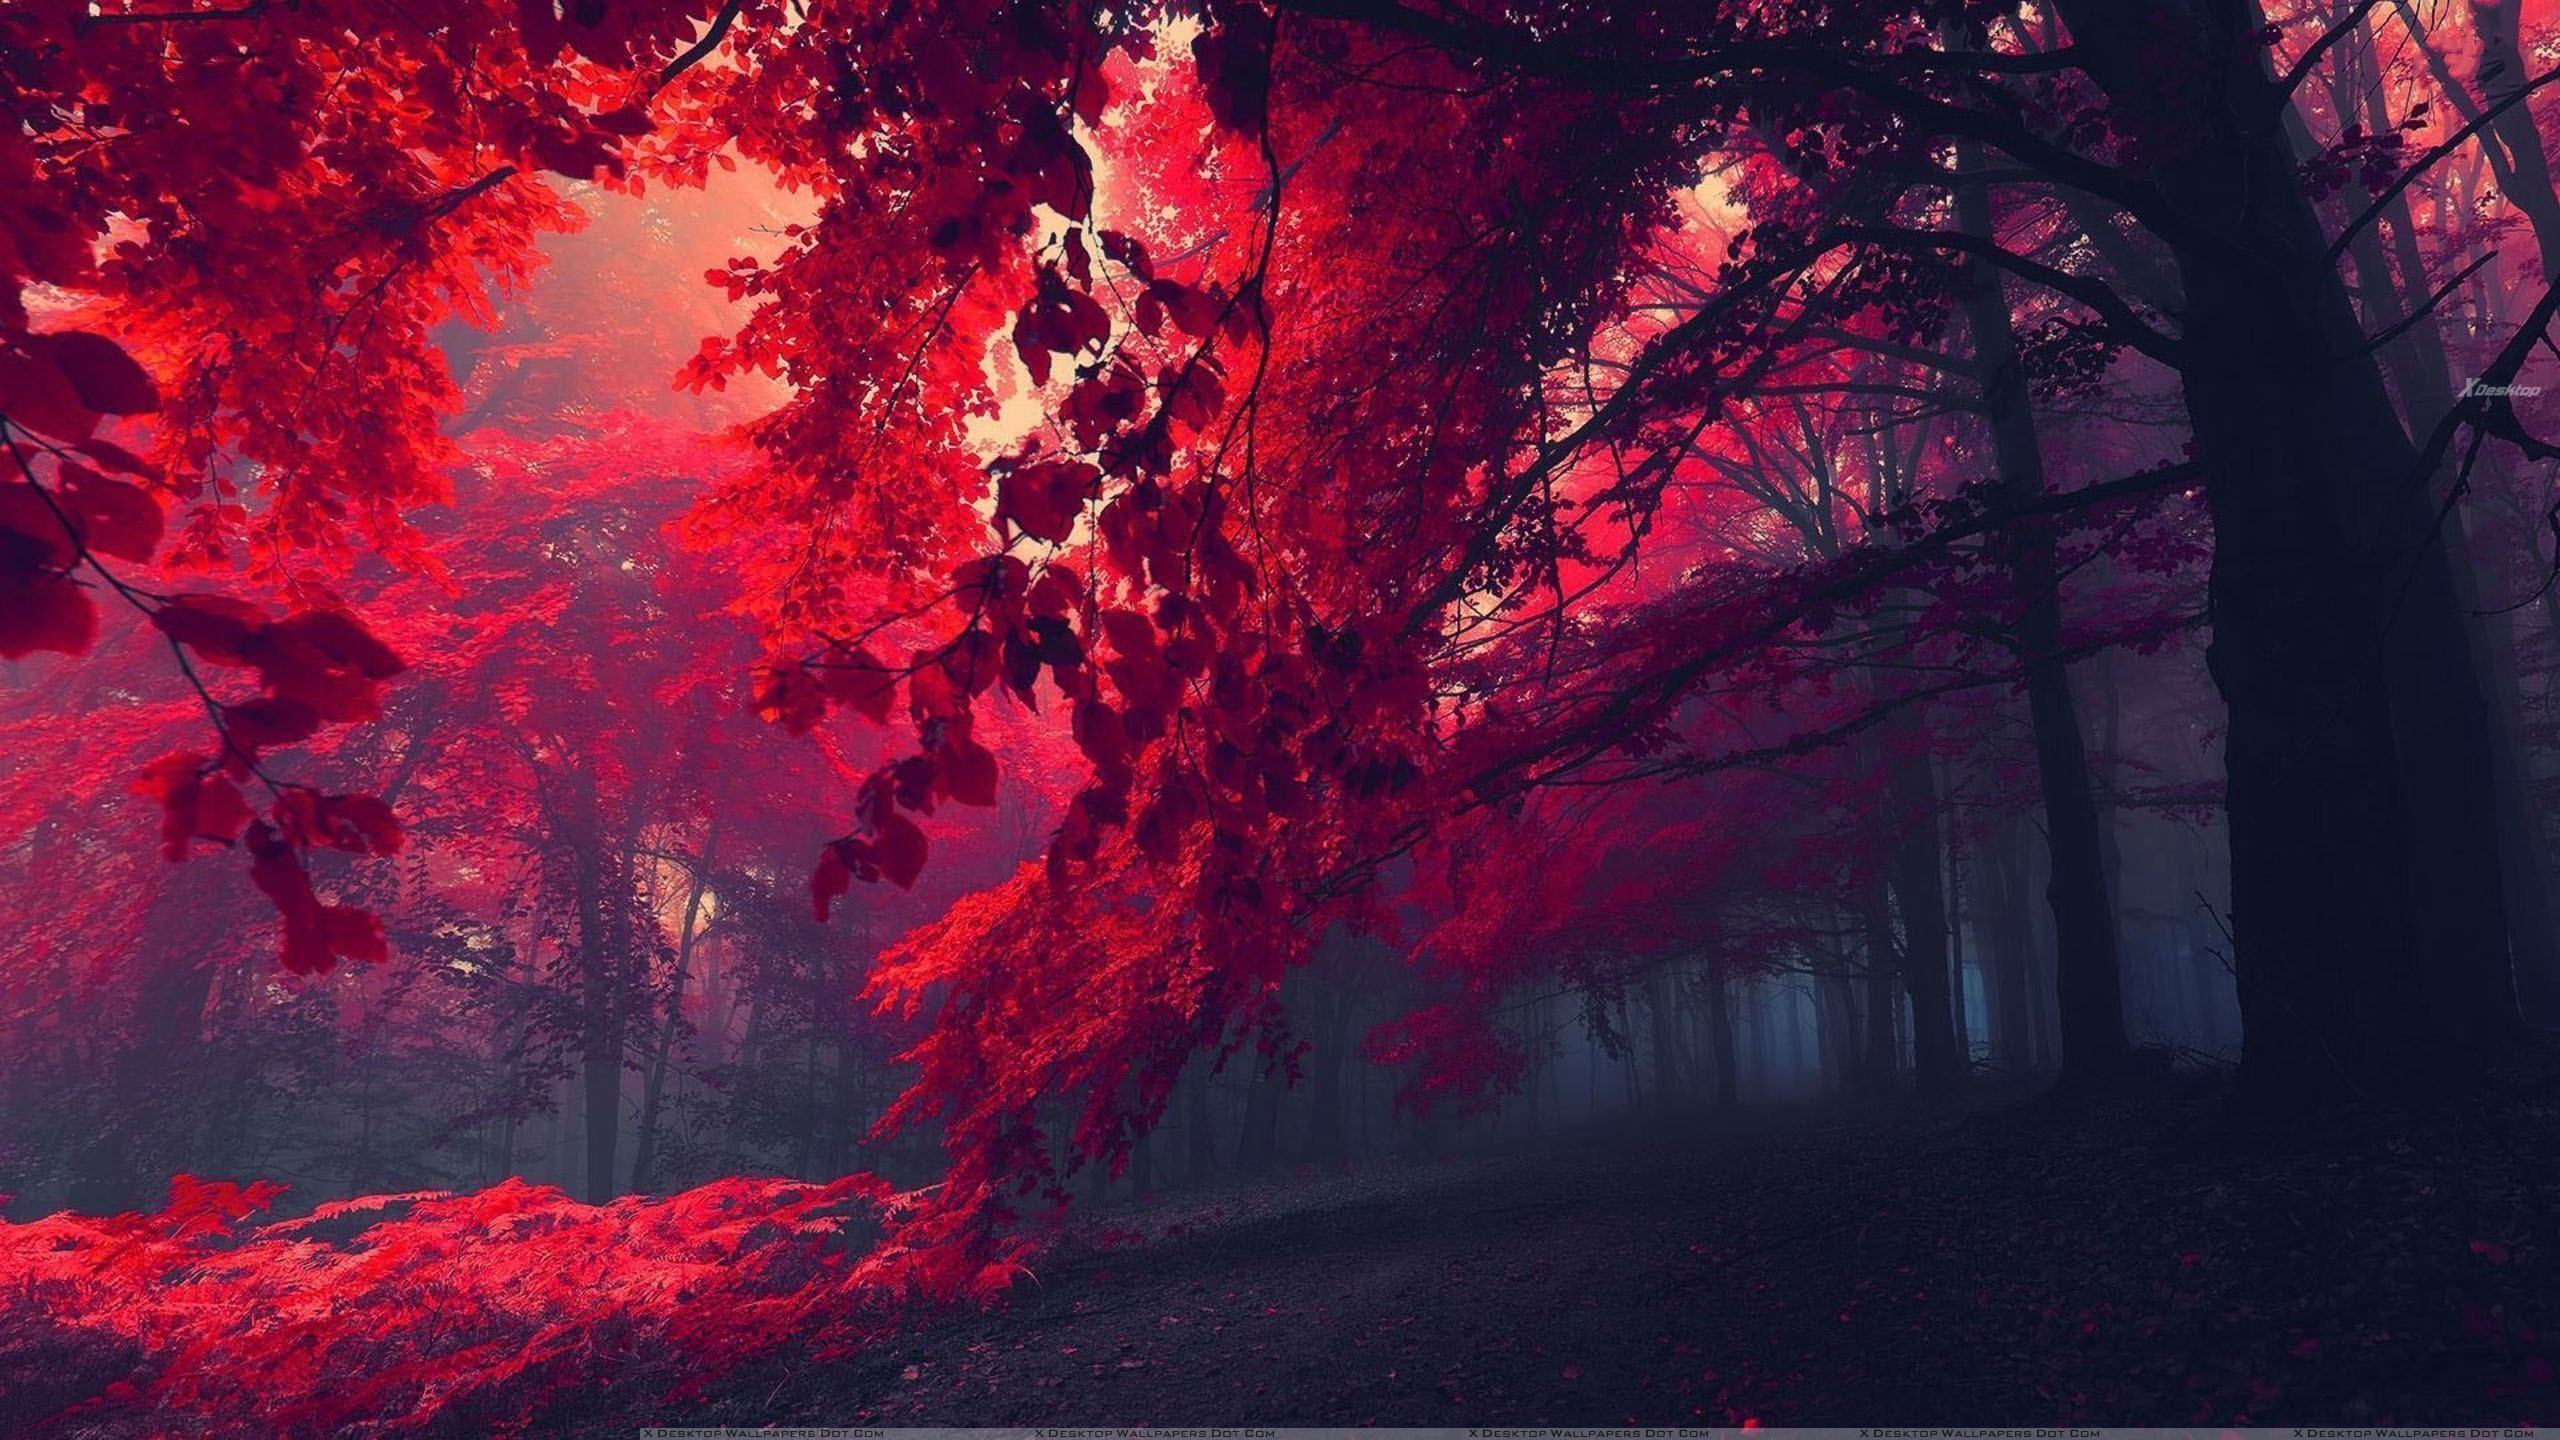 Who Wants To Walk In This Beautiful Red Forest Wallpaper